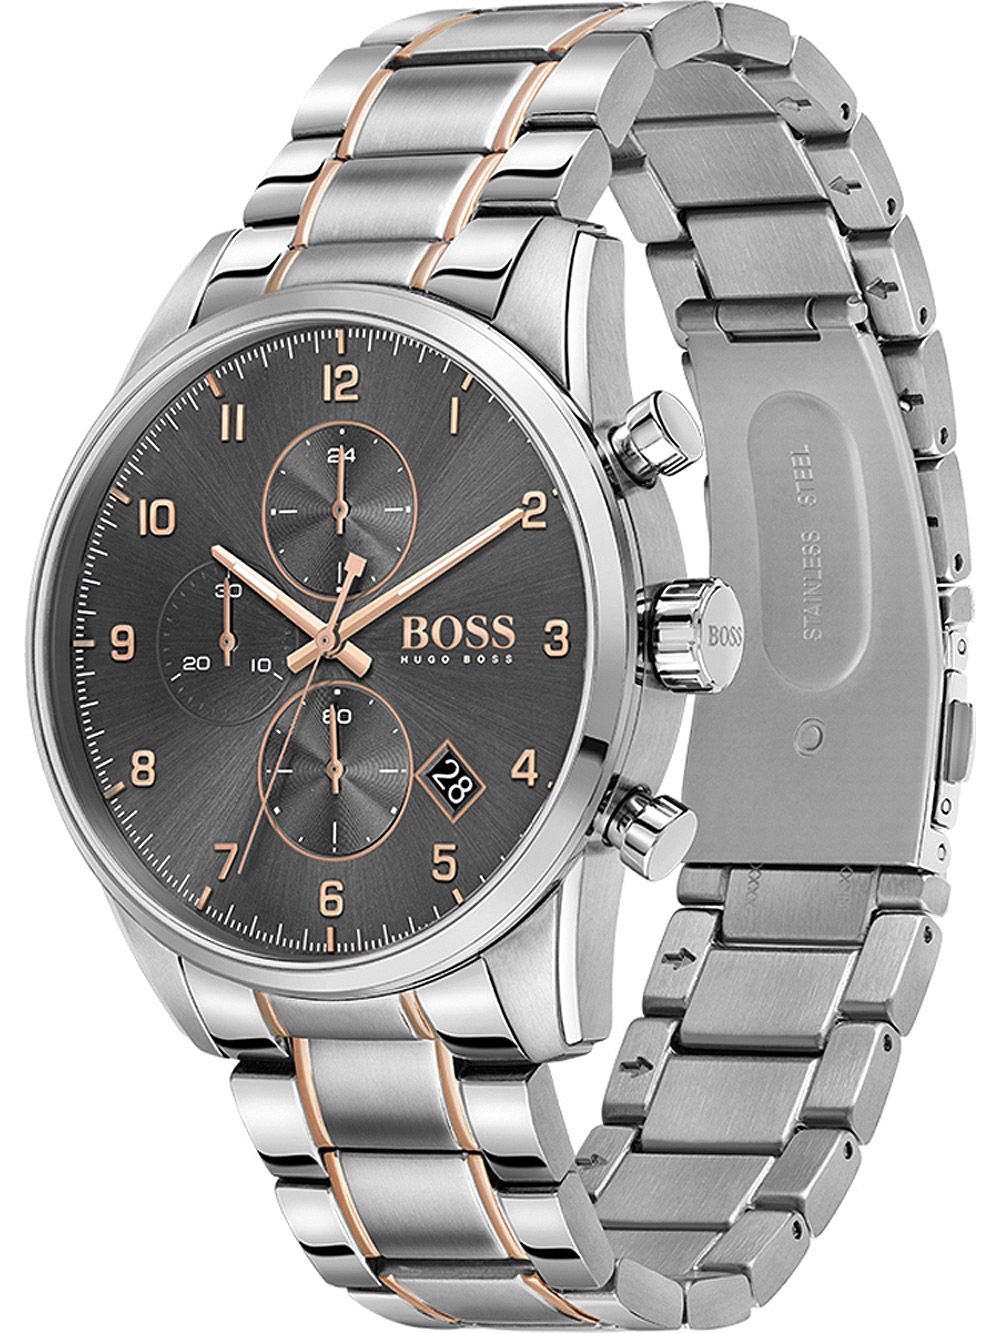 Hugo Boss Skymaster Two Tone Chronograph Men's Watch 1513789 - Big Daddy Watches #2